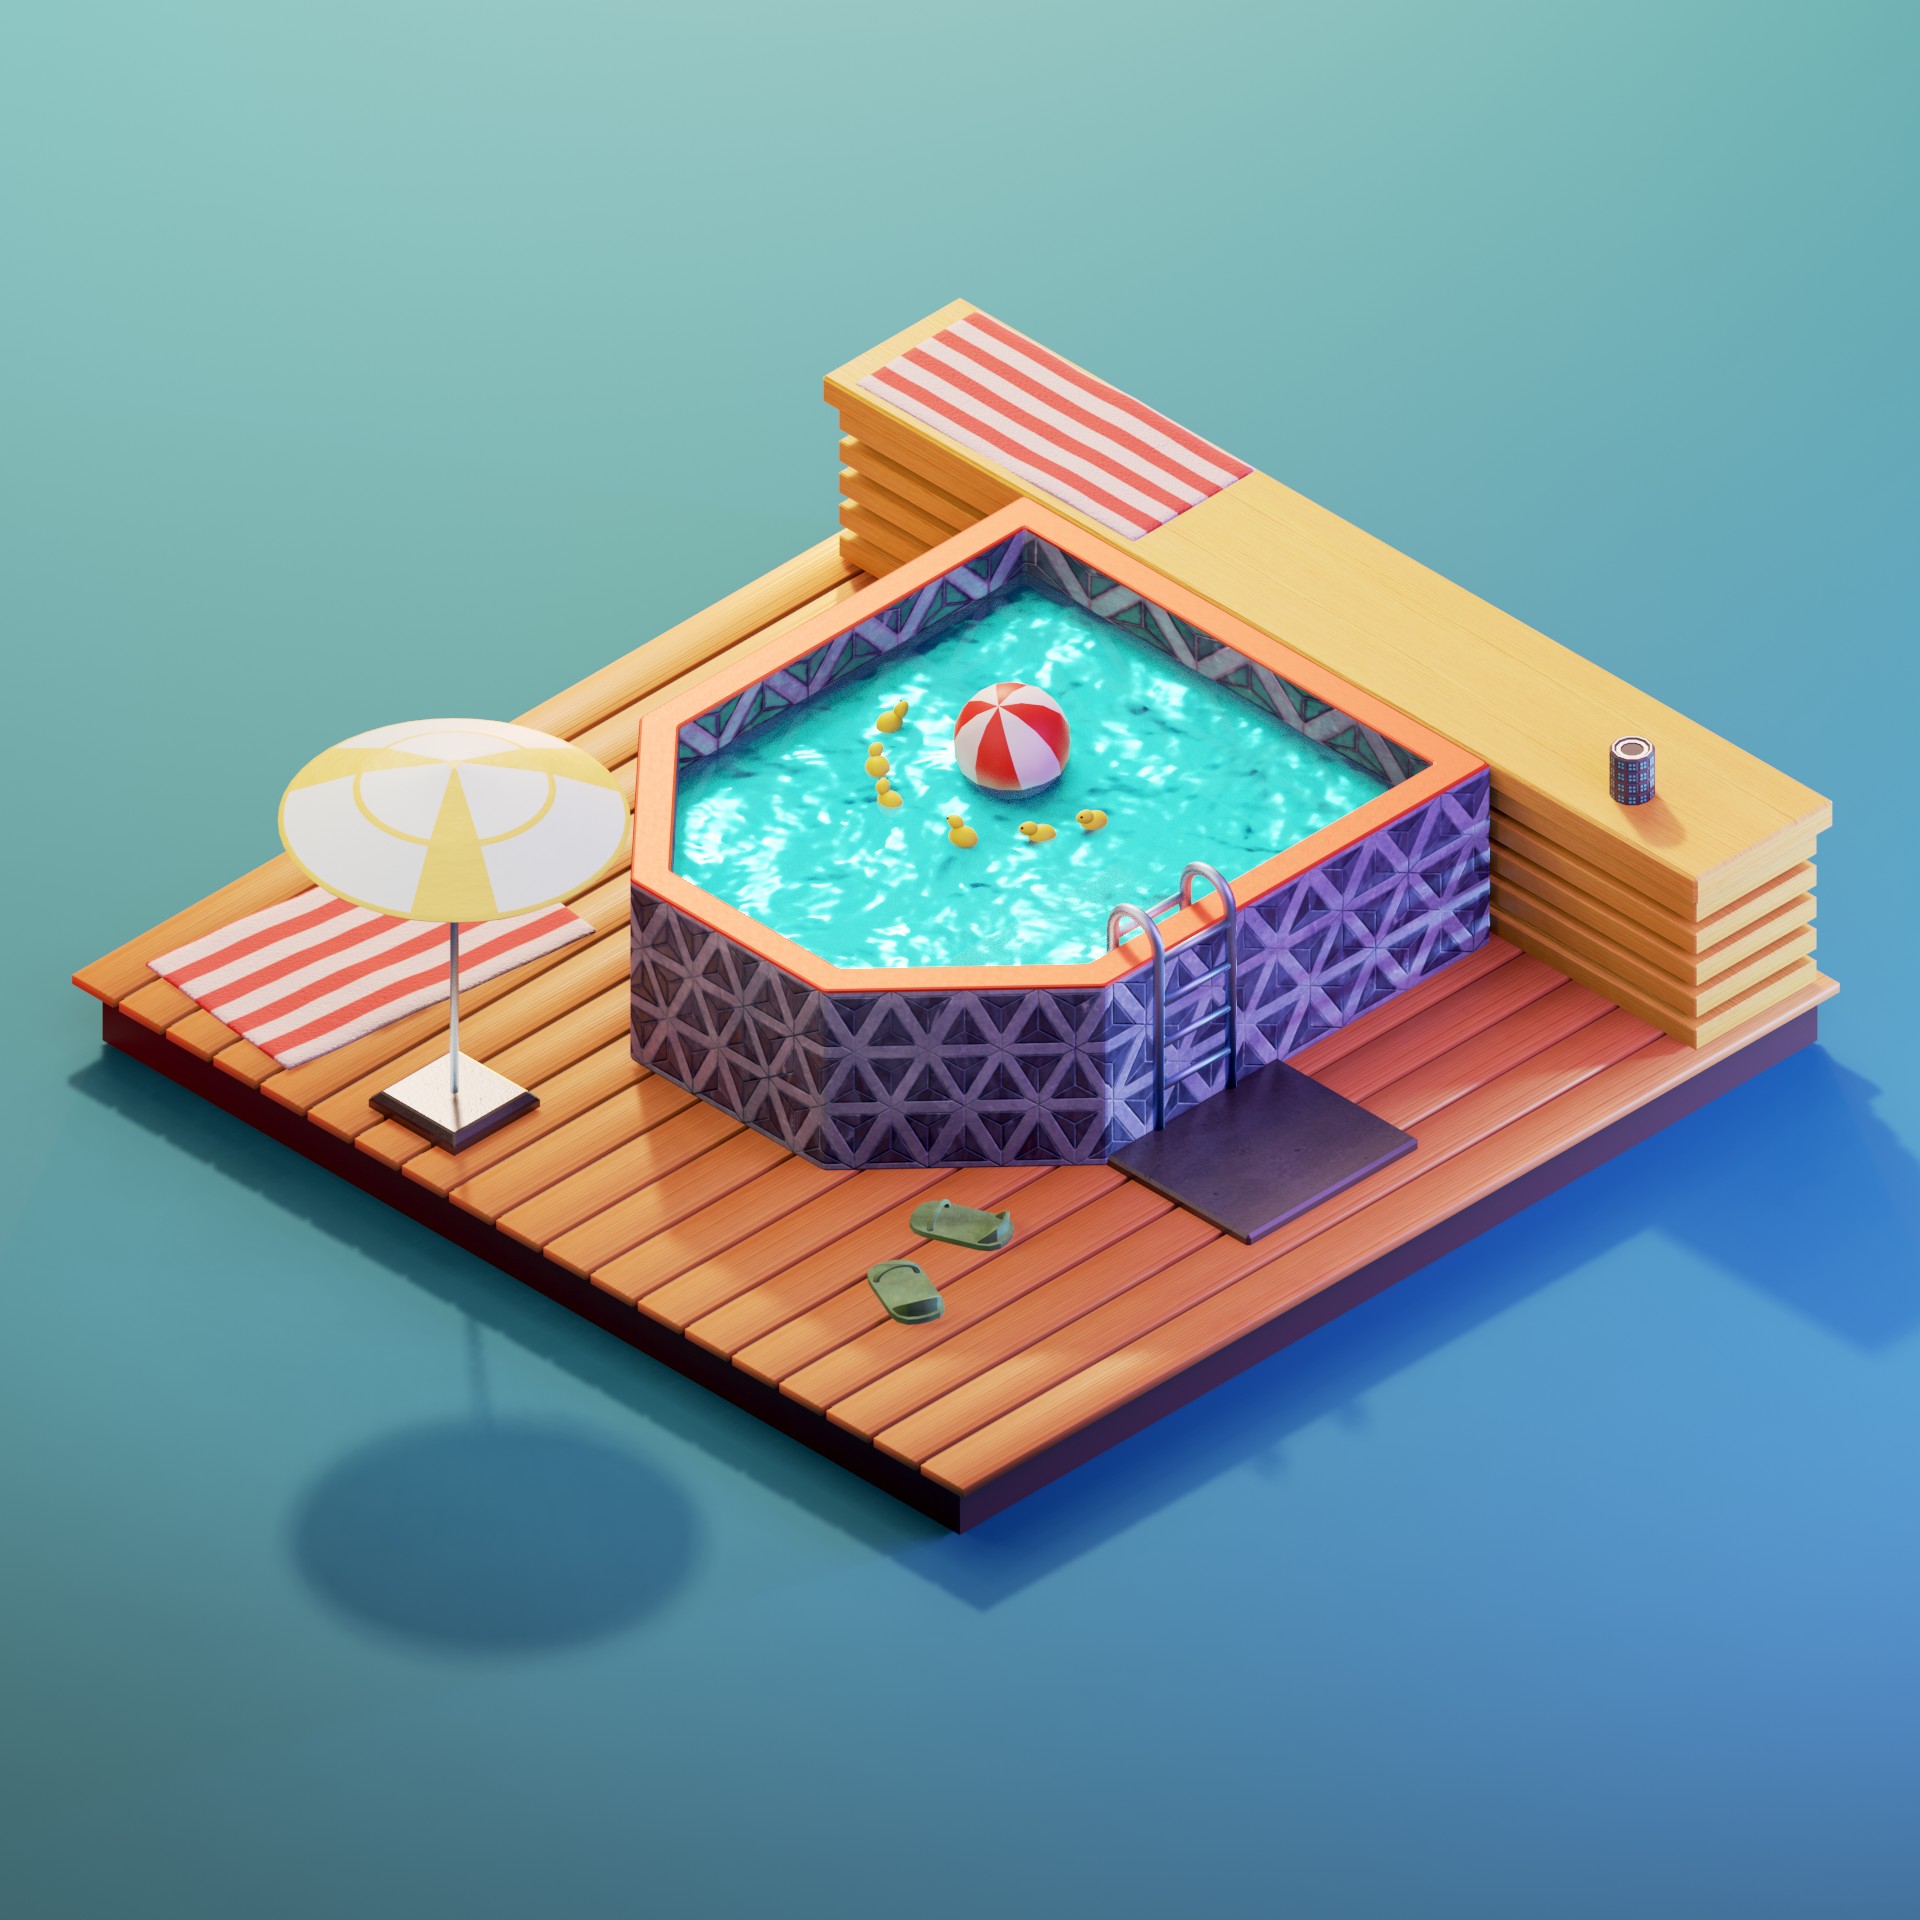 Summer Pool - Finished Projects - Blender Artists Community